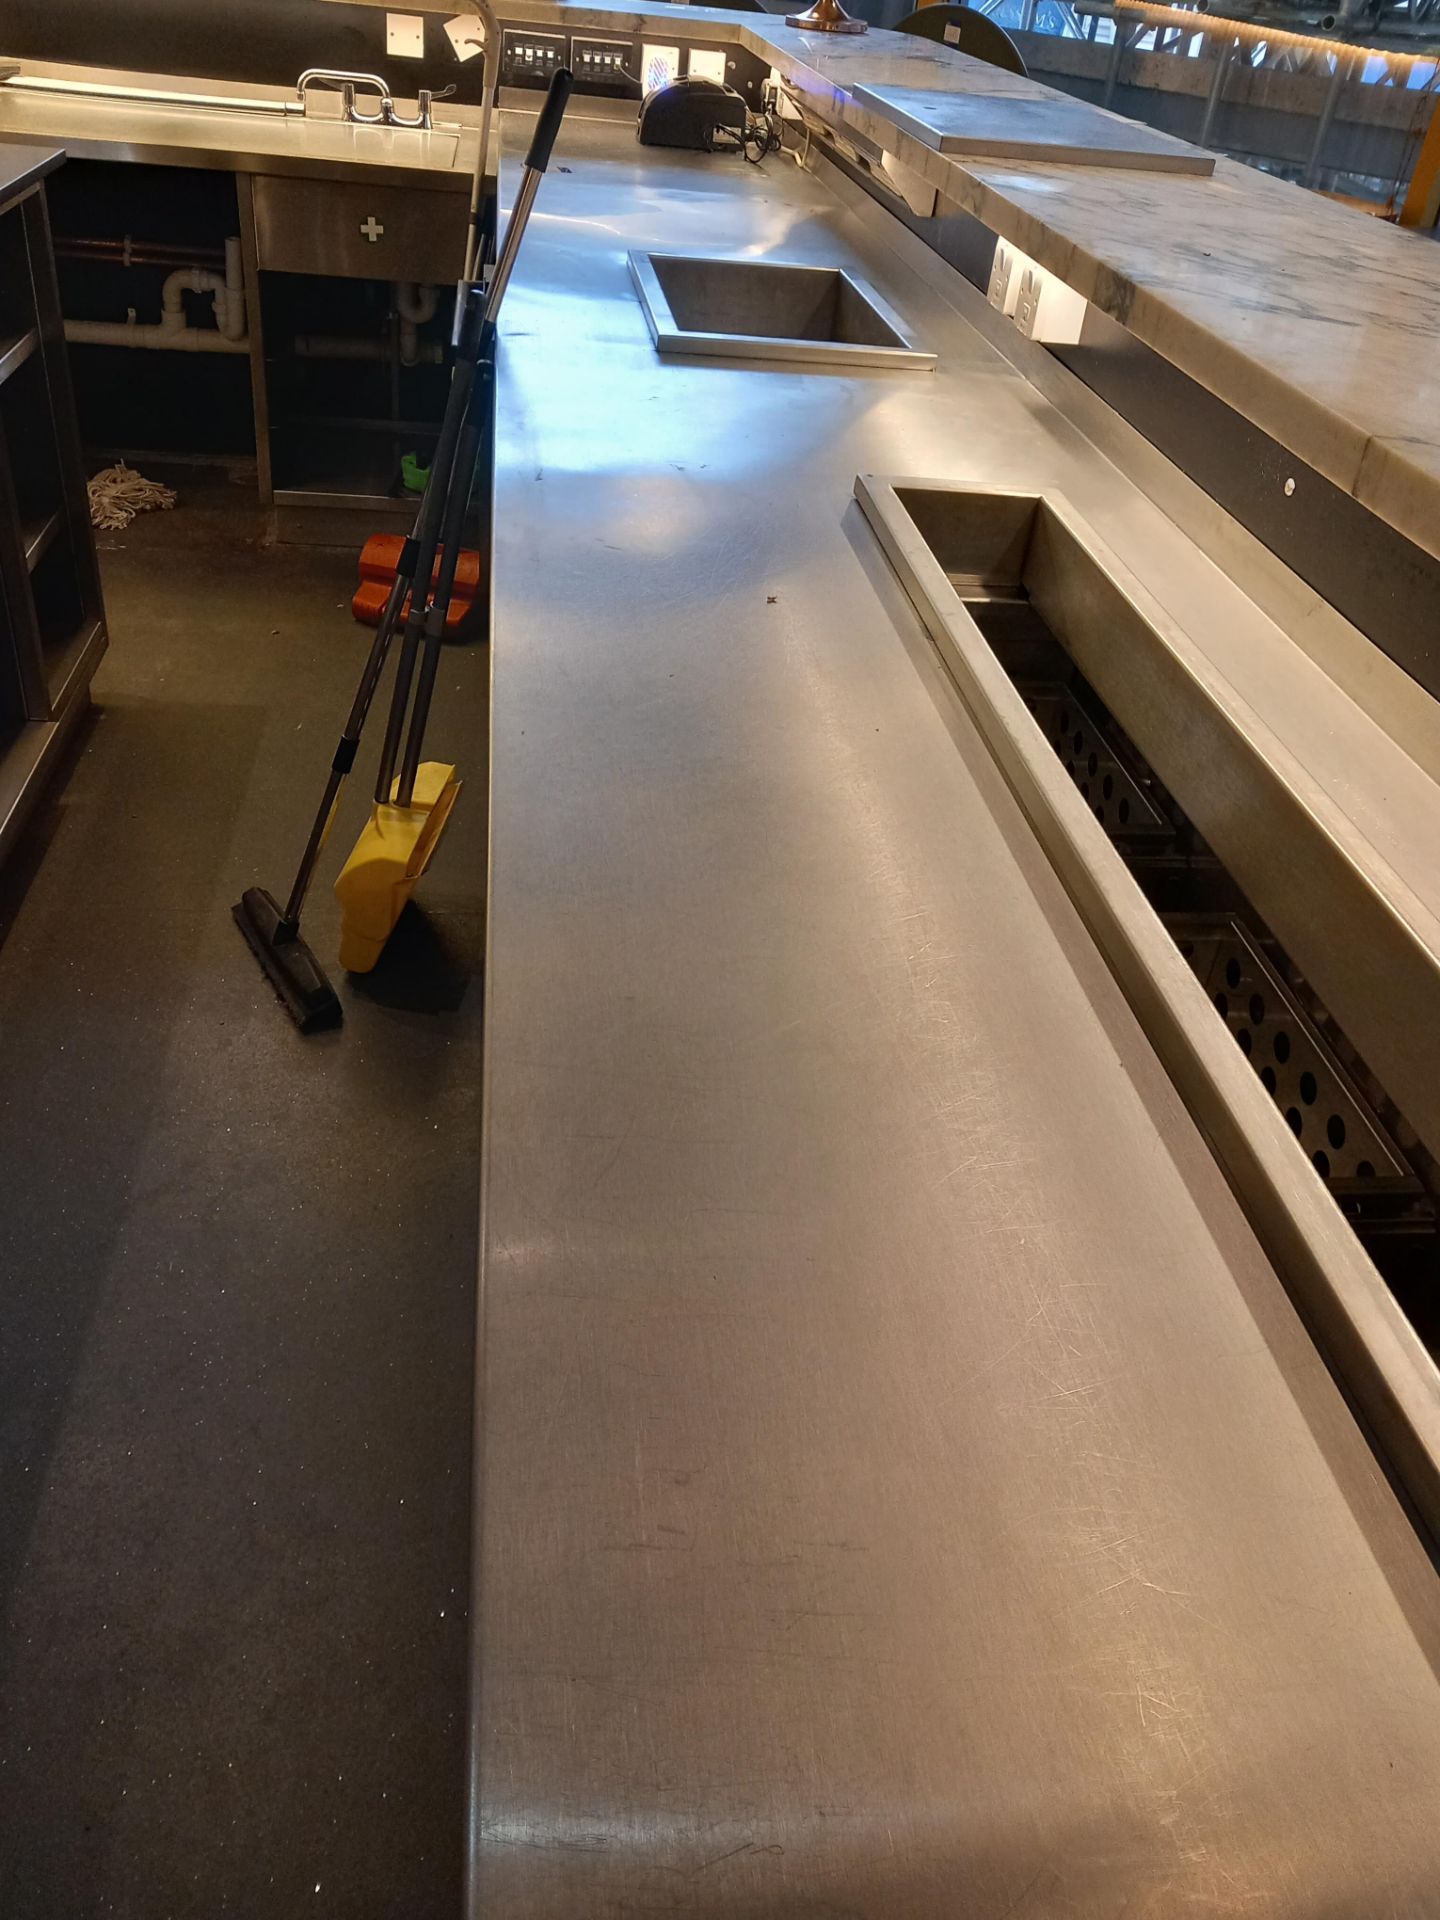 Stainless steel ‘L’ shaped bar unit approx. 8000mm - Image 21 of 21